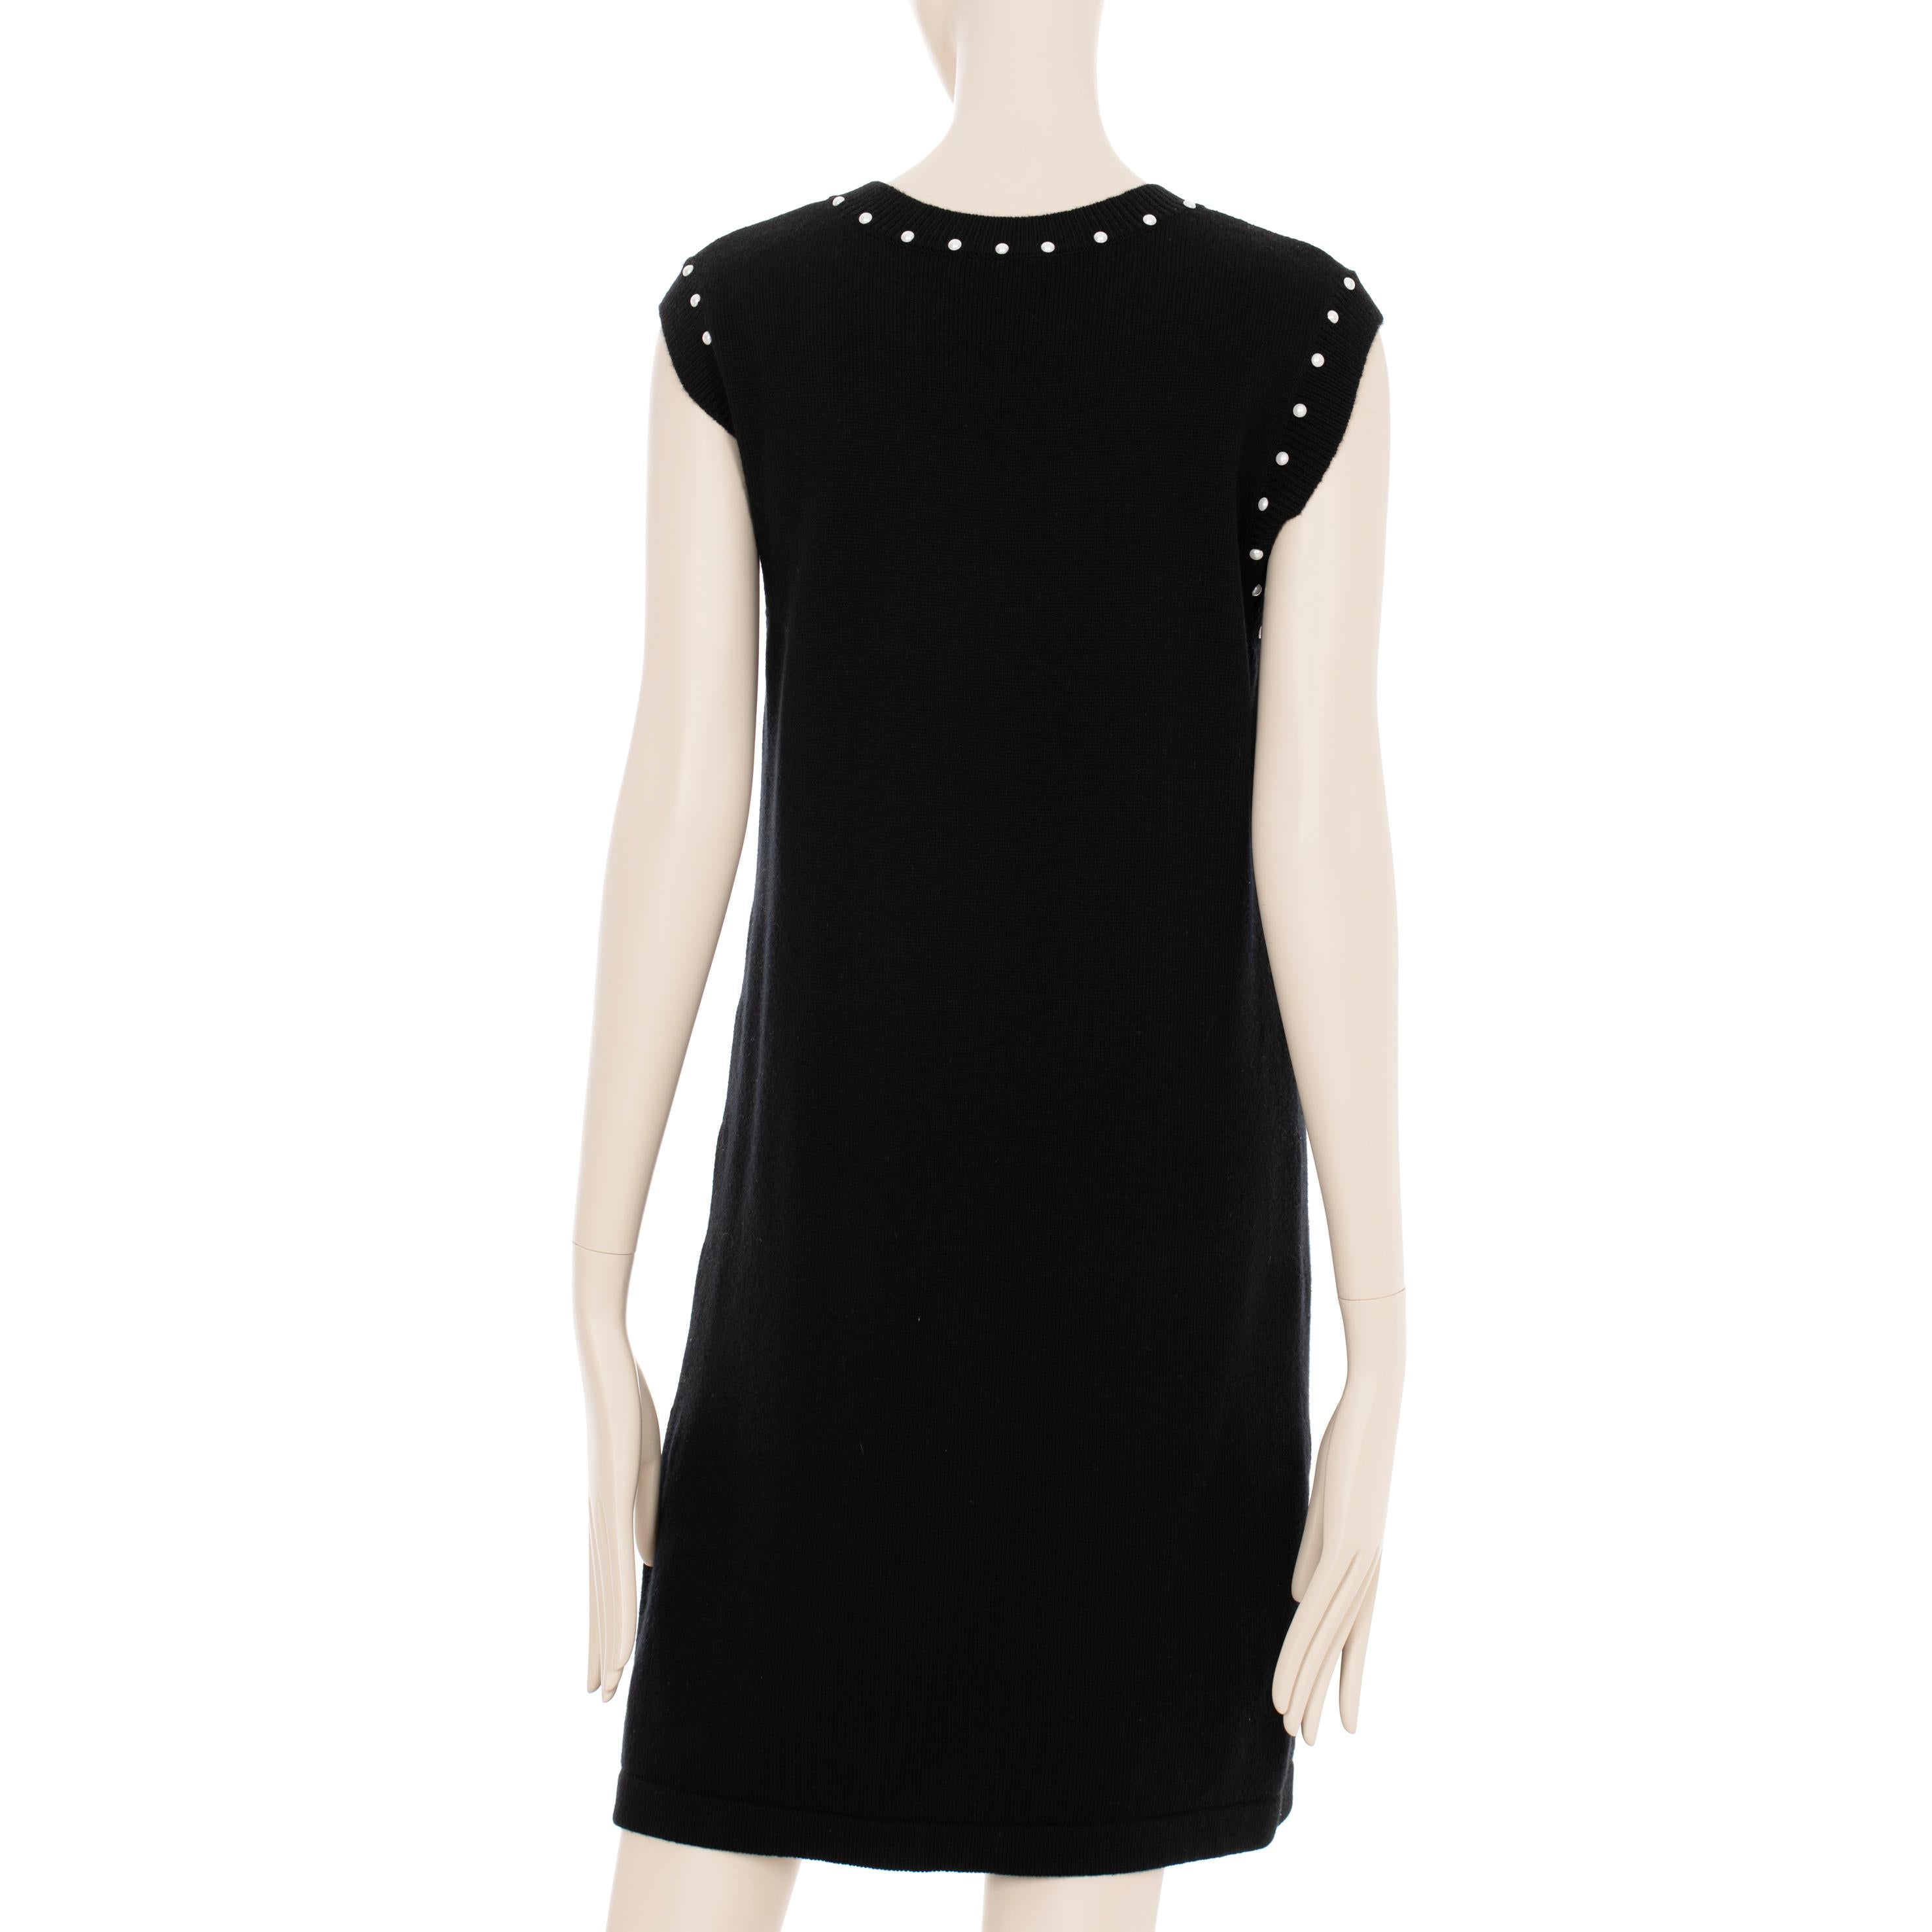 Chanel Black Knit Dress With Faux Pearl Details 40 FR For Sale 3